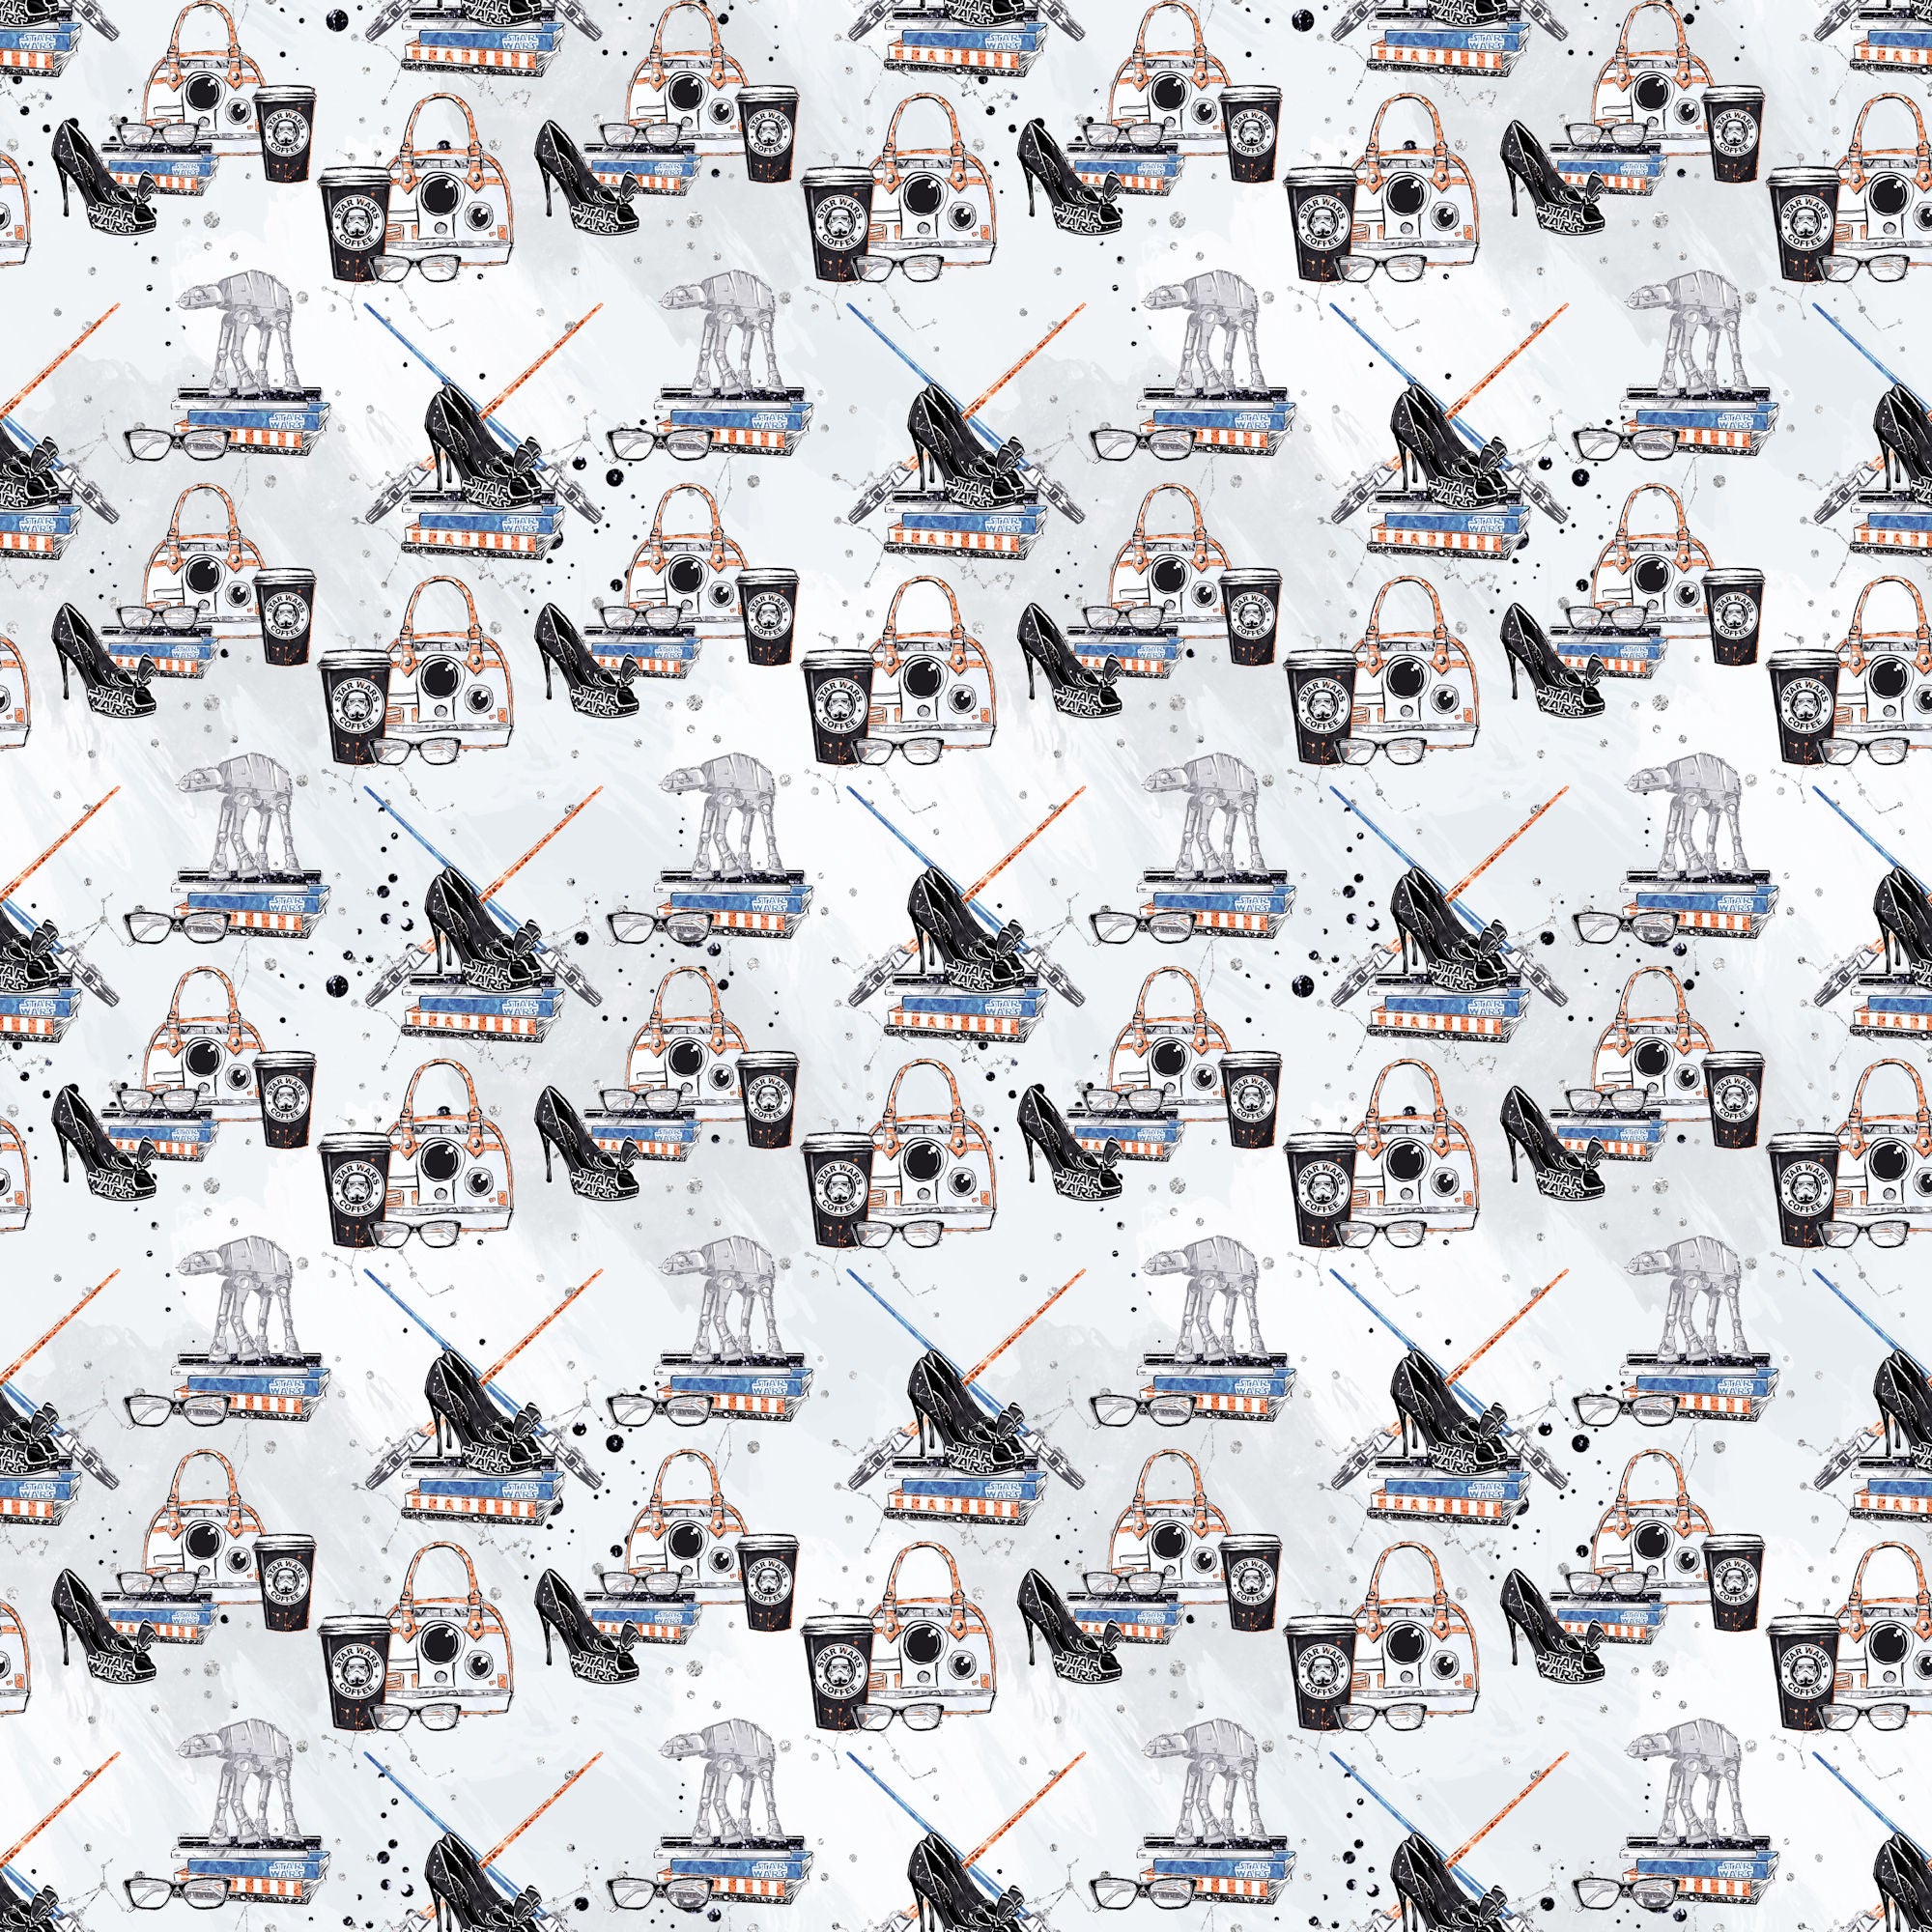 Space Wars Collection Trooper 12 x 12 Double-Sided Scrapbook Paper by SSC Designs